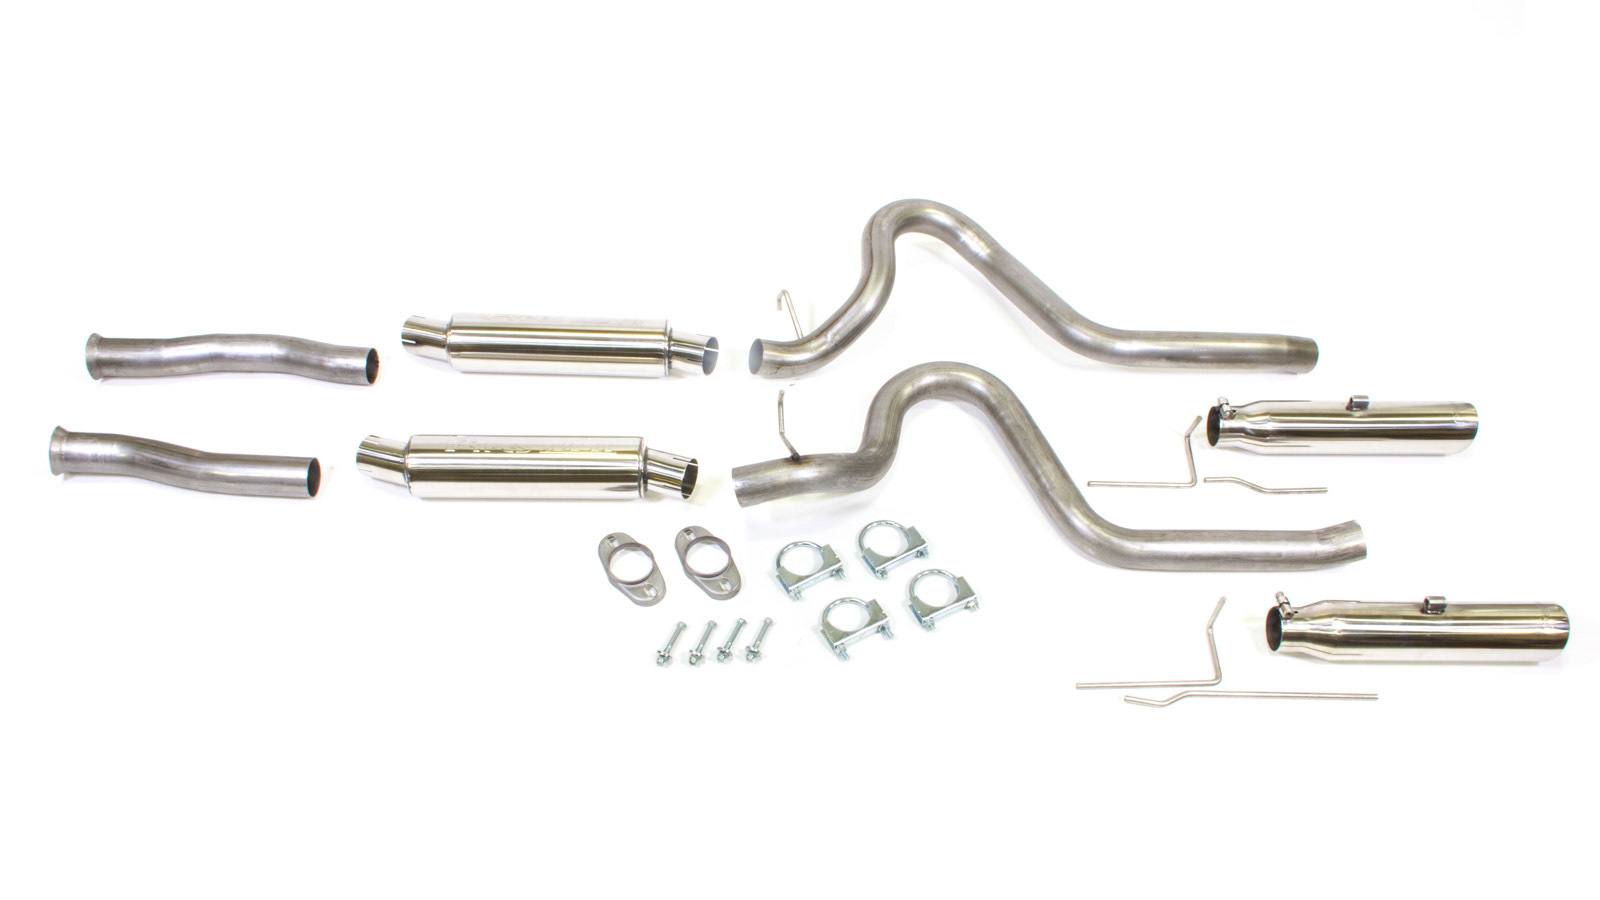 Pypes Exhaust System, Pype Bomb, Cat-Back, 2-1/2" Dia. 3" Polished Tips, Stainless, Ford Modular, Mustang 1979-2004,